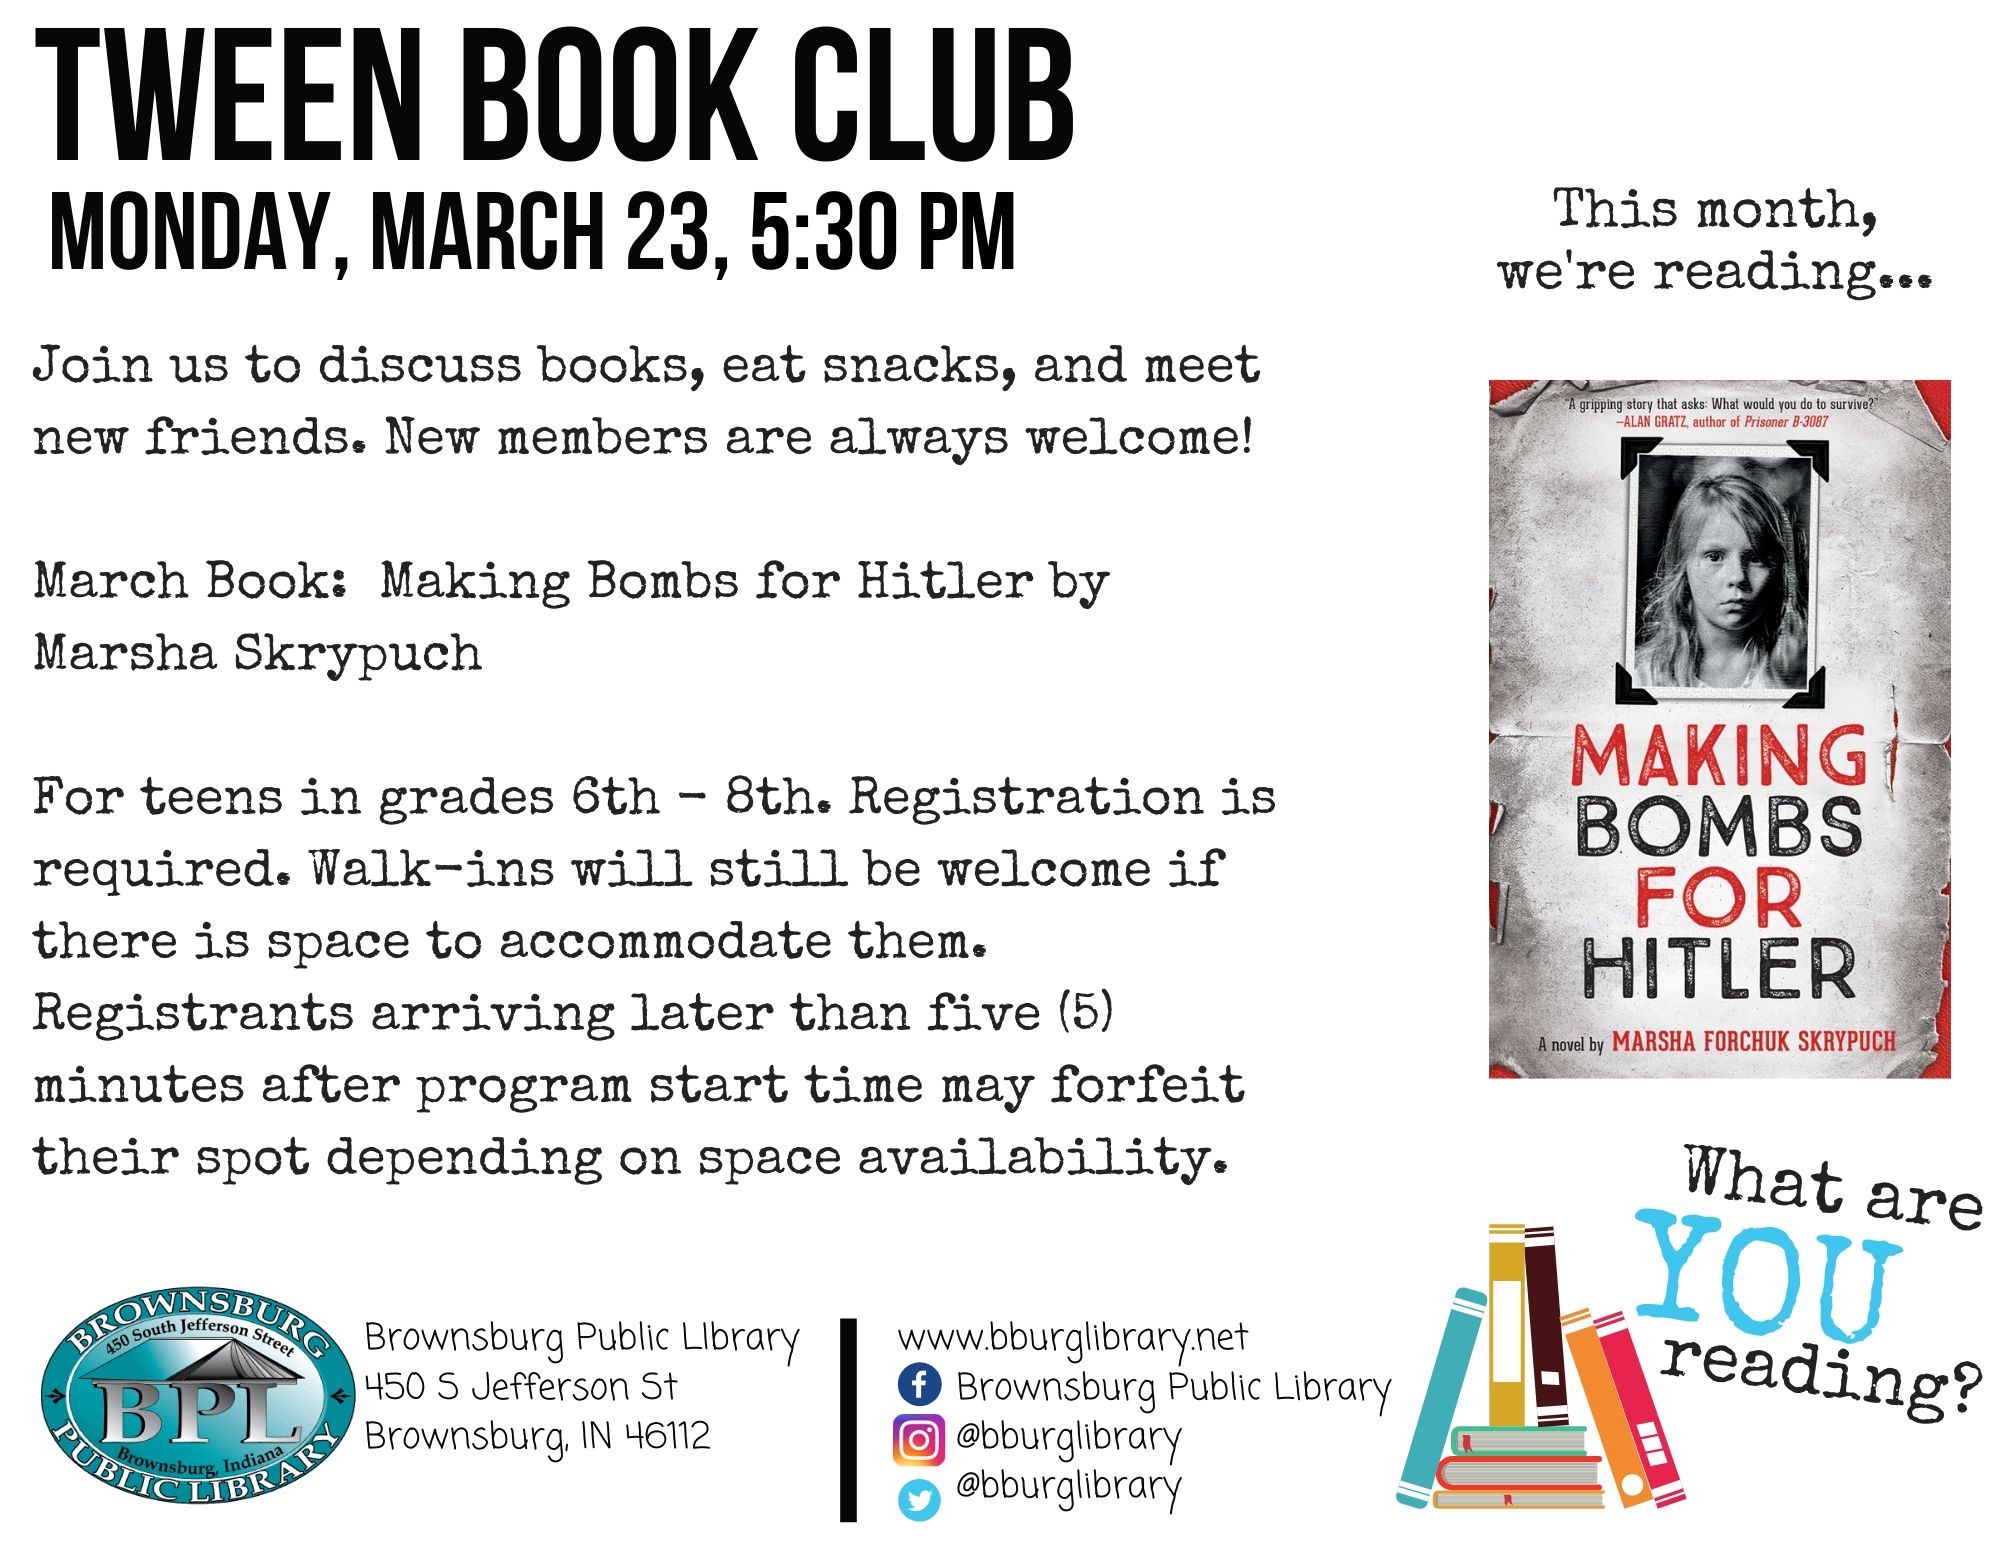 Tween Book Club Monday March 23 at 5:30